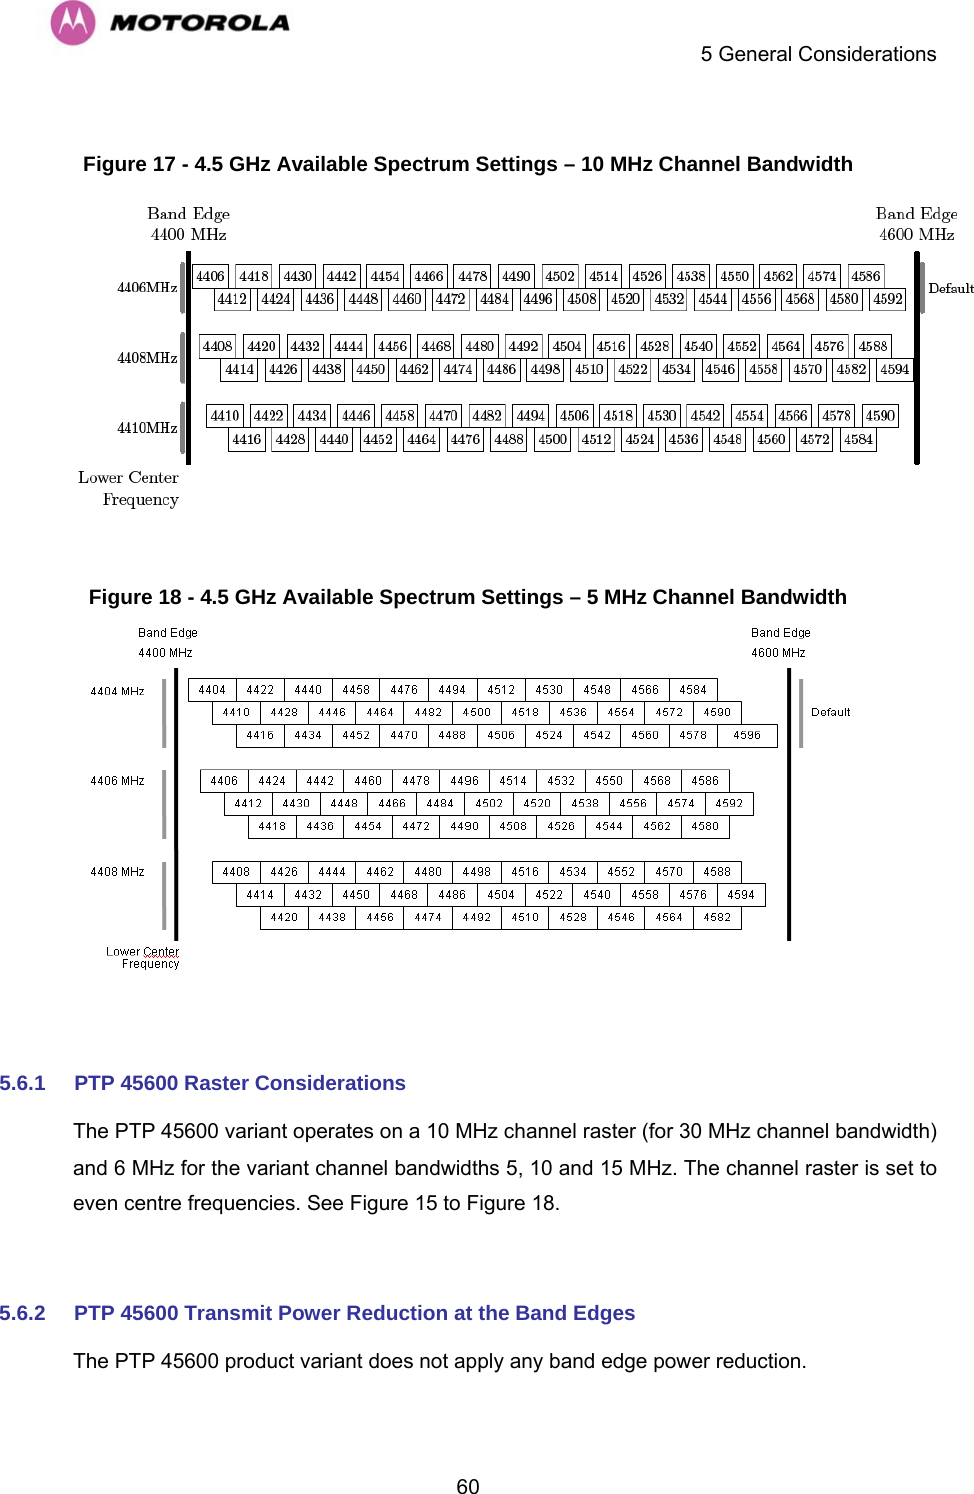    5 General Considerations  60 Figure 17 - 4.5 GHz Available Spectrum Settings – 10 MHz Channel Bandwidth    Figure 18 - 4.5 GHz Available Spectrum Settings – 5 MHz Channel Bandwidth   5.6.1  PTP 45600 Raster Considerations The PTP 45600 variant operates on a 10 MHz channel raster (for 30 MHz channel bandwidth) and 6 MHz for the variant channel bandwidths 5, 10 and 15 MHz. The channel raster is set to even centre frequencies. See Figure 15 to Figure 18.  5.6.2  PTP 45600 Transmit Power Reduction at the Band Edges The PTP 45600 product variant does not apply any band edge power reduction. 